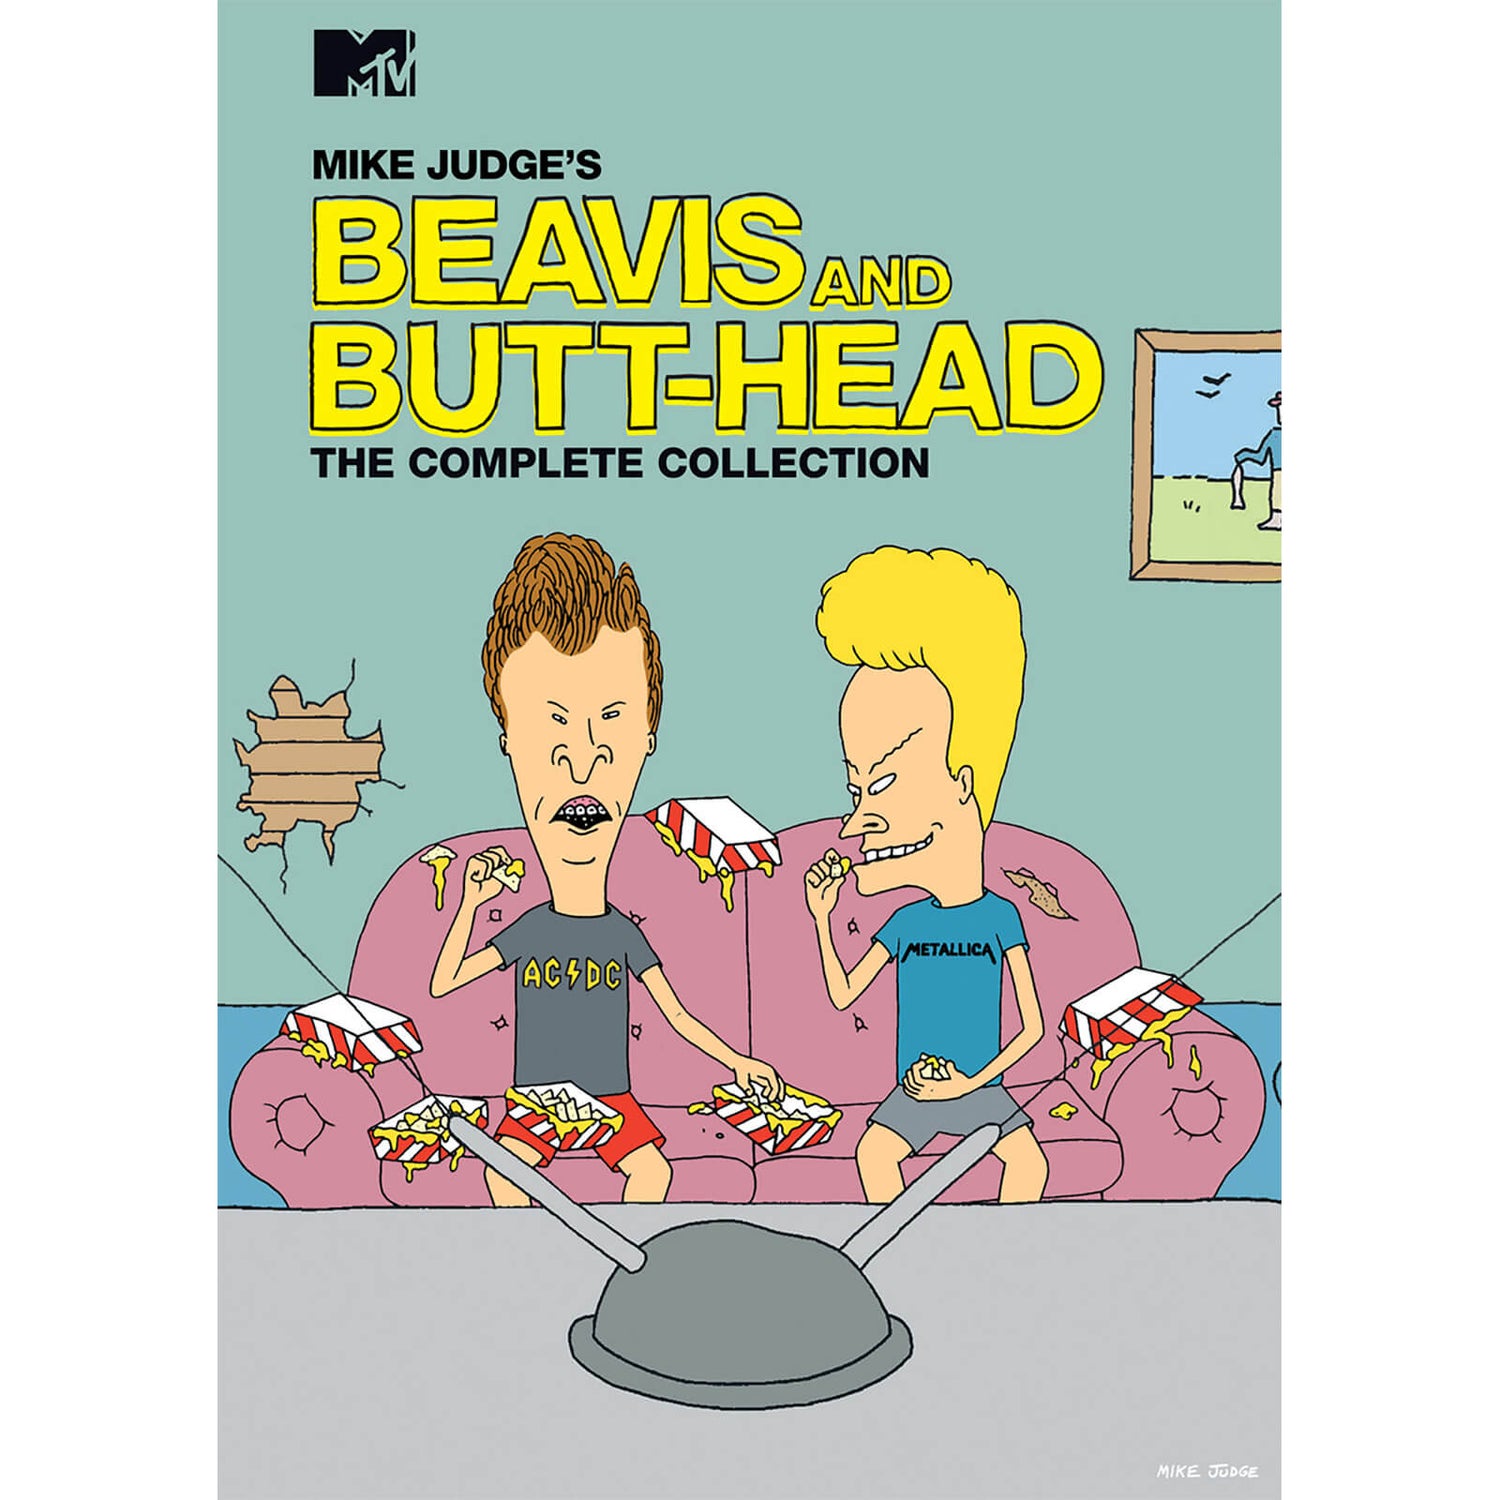 Mike Judge's Beavis and Butt-Head, The Complete Collection